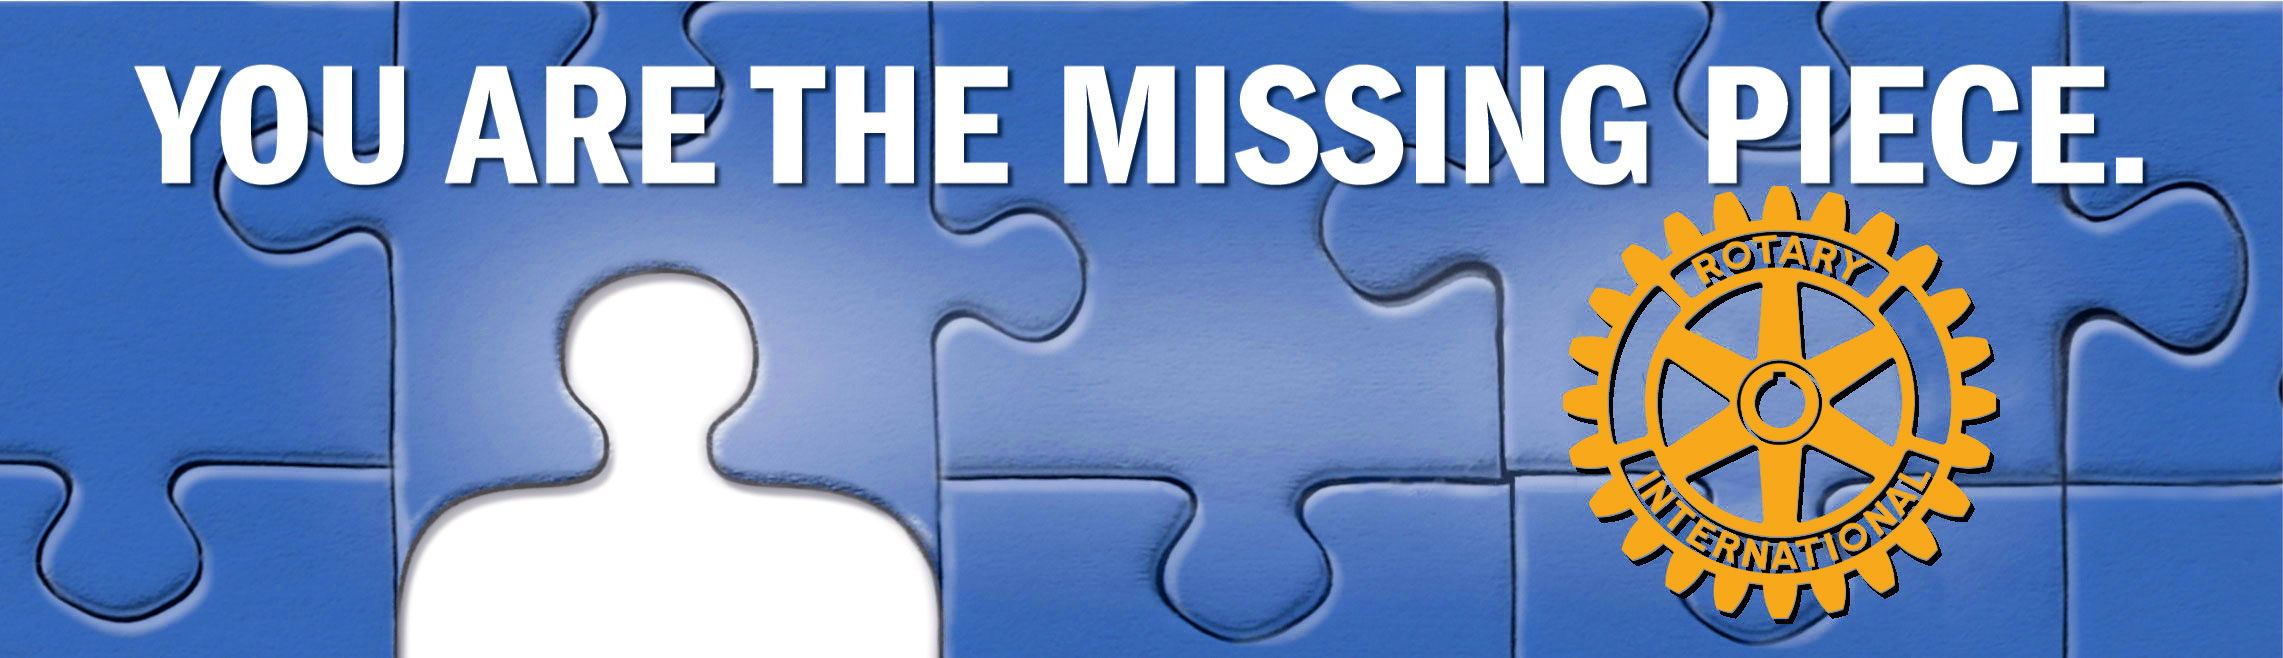 Puzzle pieces with Rotary logo and statement "You Are The Missing Piece".